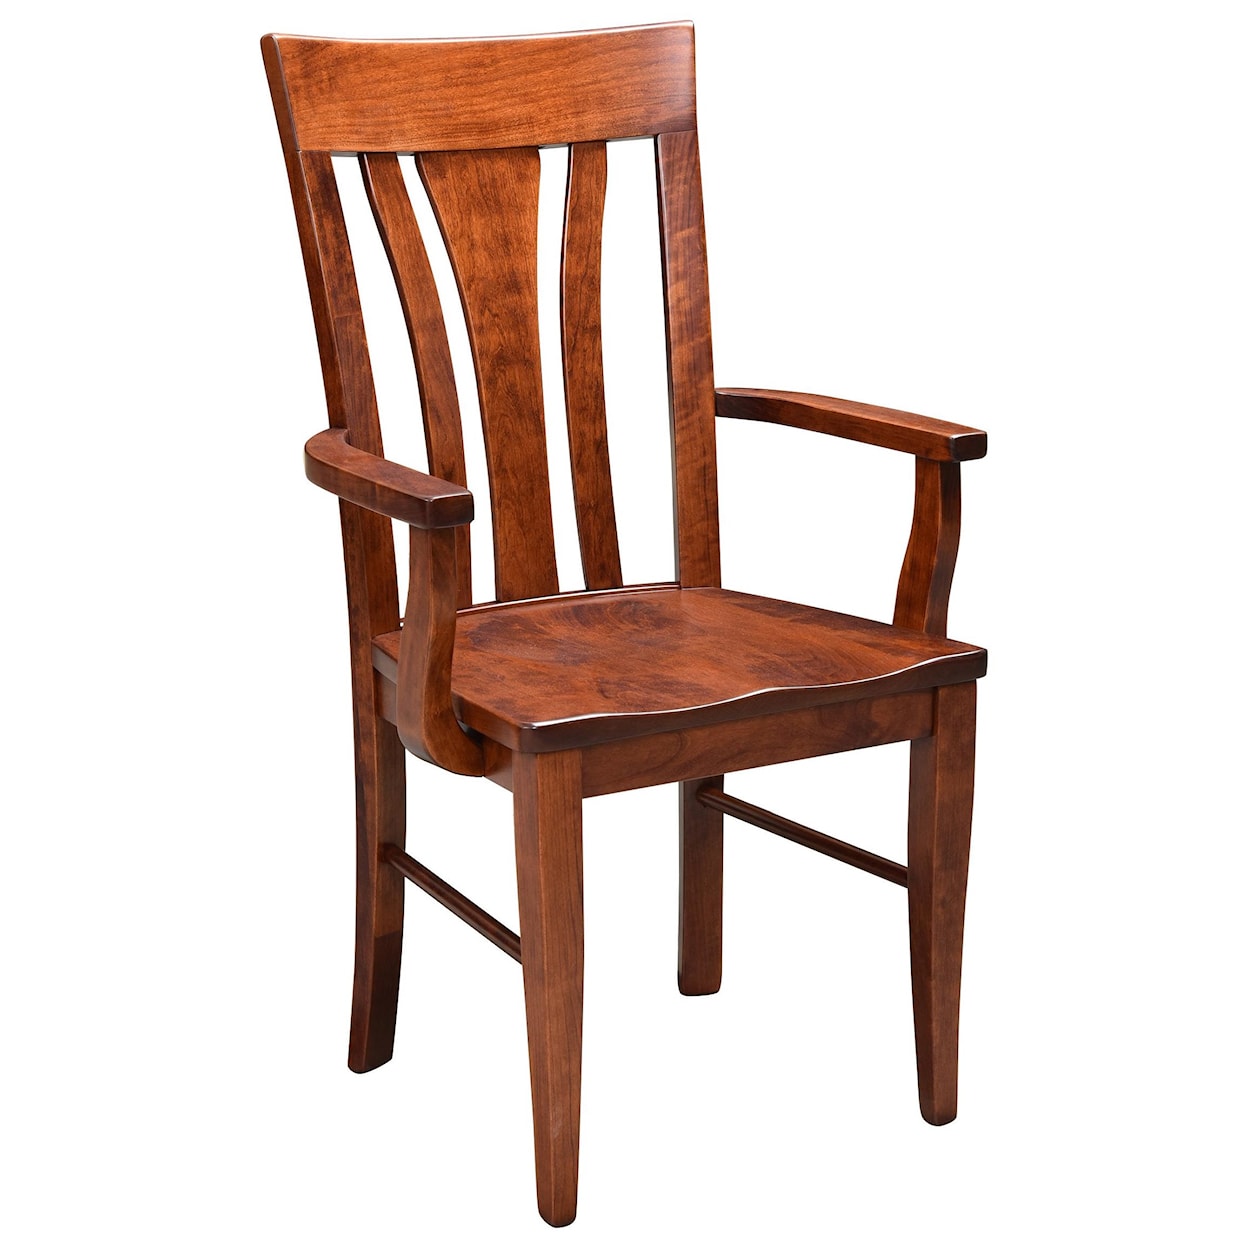 Wengerd Wood Products Mentor Arm Chair